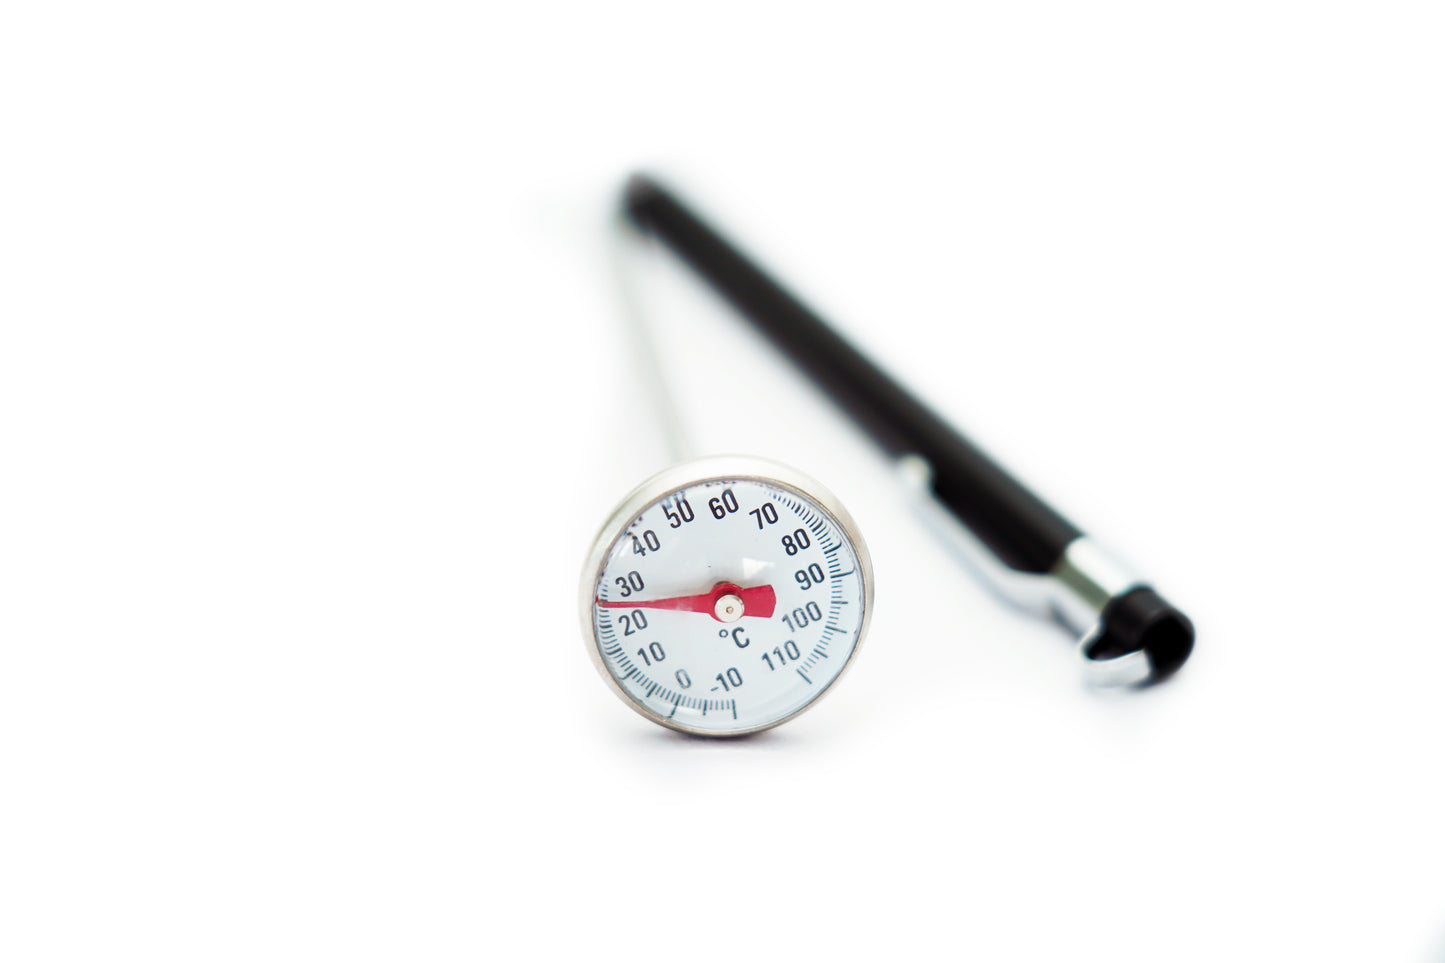 Meat Thermometer Stainless Steel - ETI @ RoyalDesign